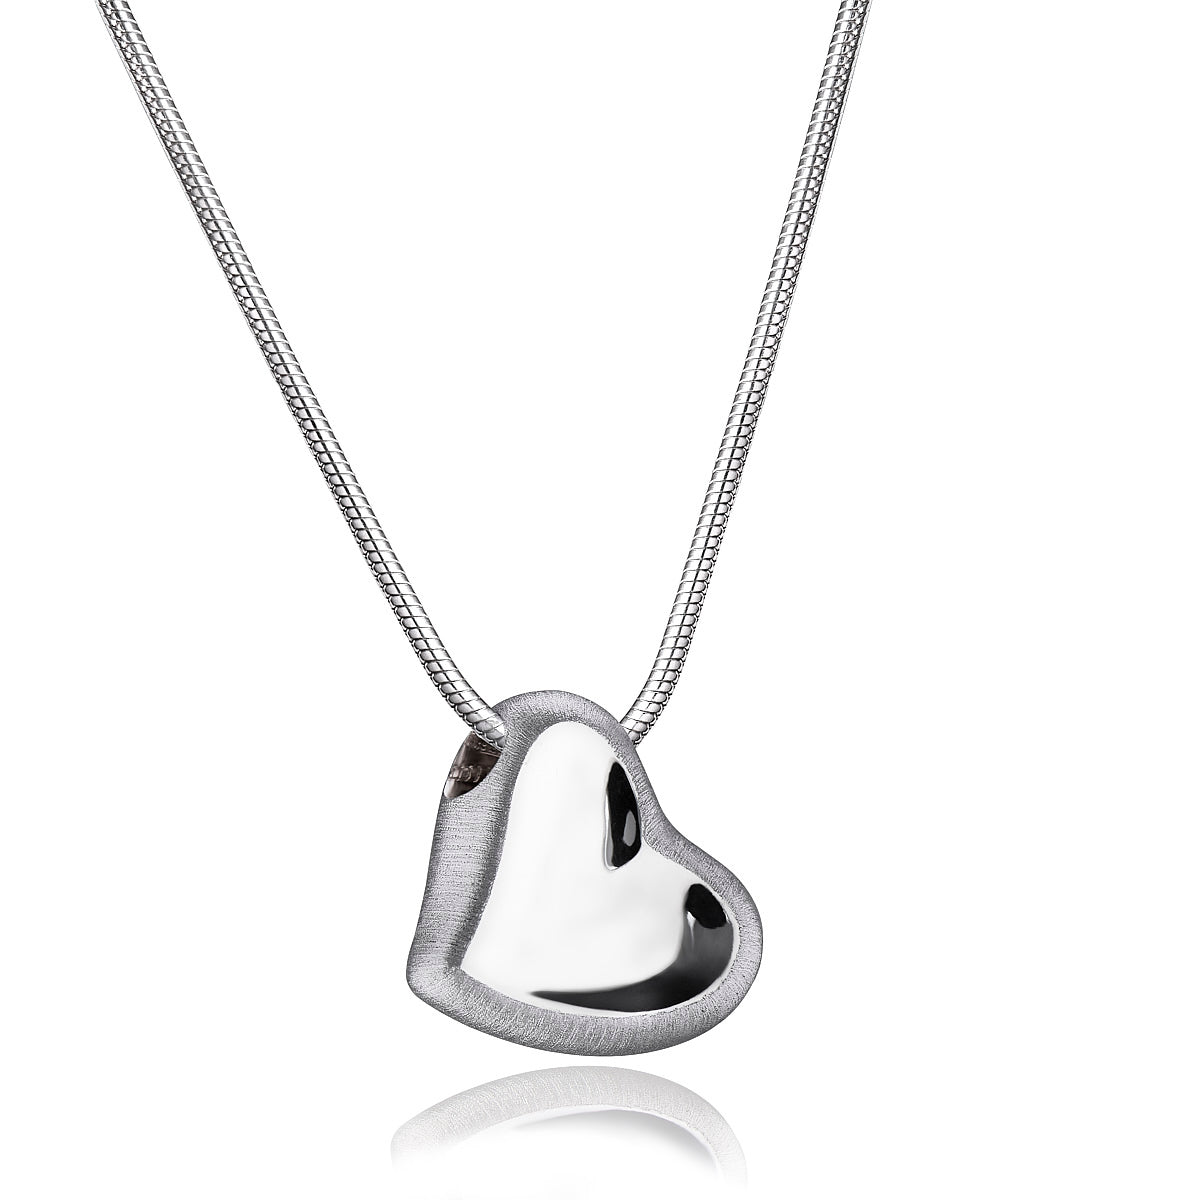 Pendant: Leaning Heart - Rhodium Plated Two Tone